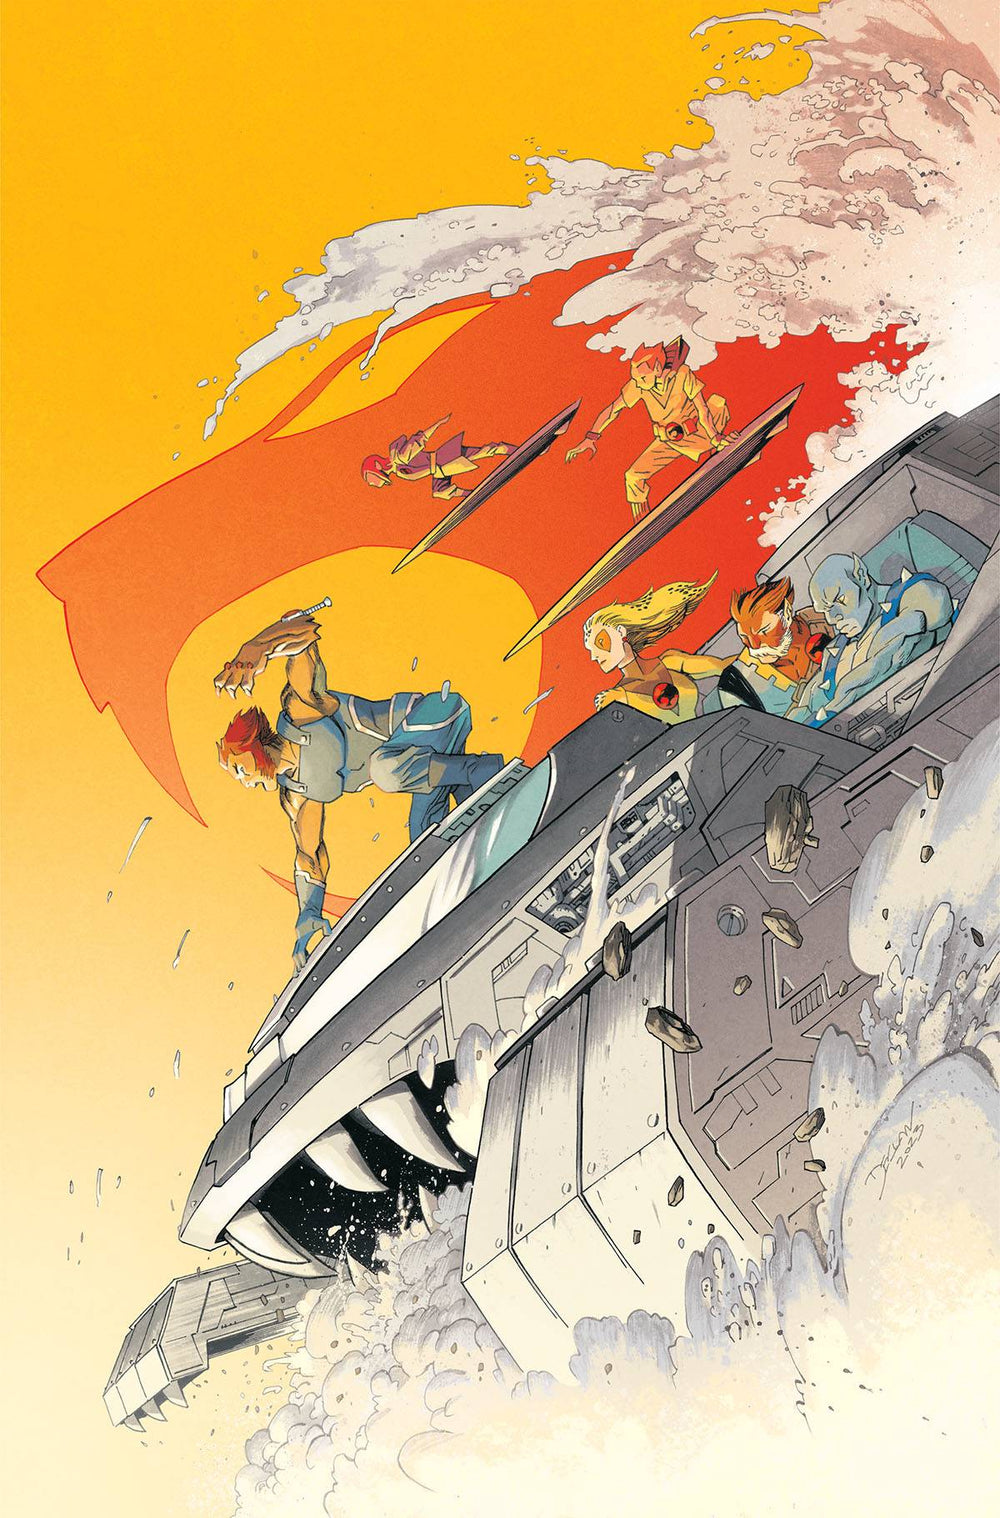 THUNDERCATS #3 INCENTIVE COVER 1:20 BY DECLAN SHALVEY